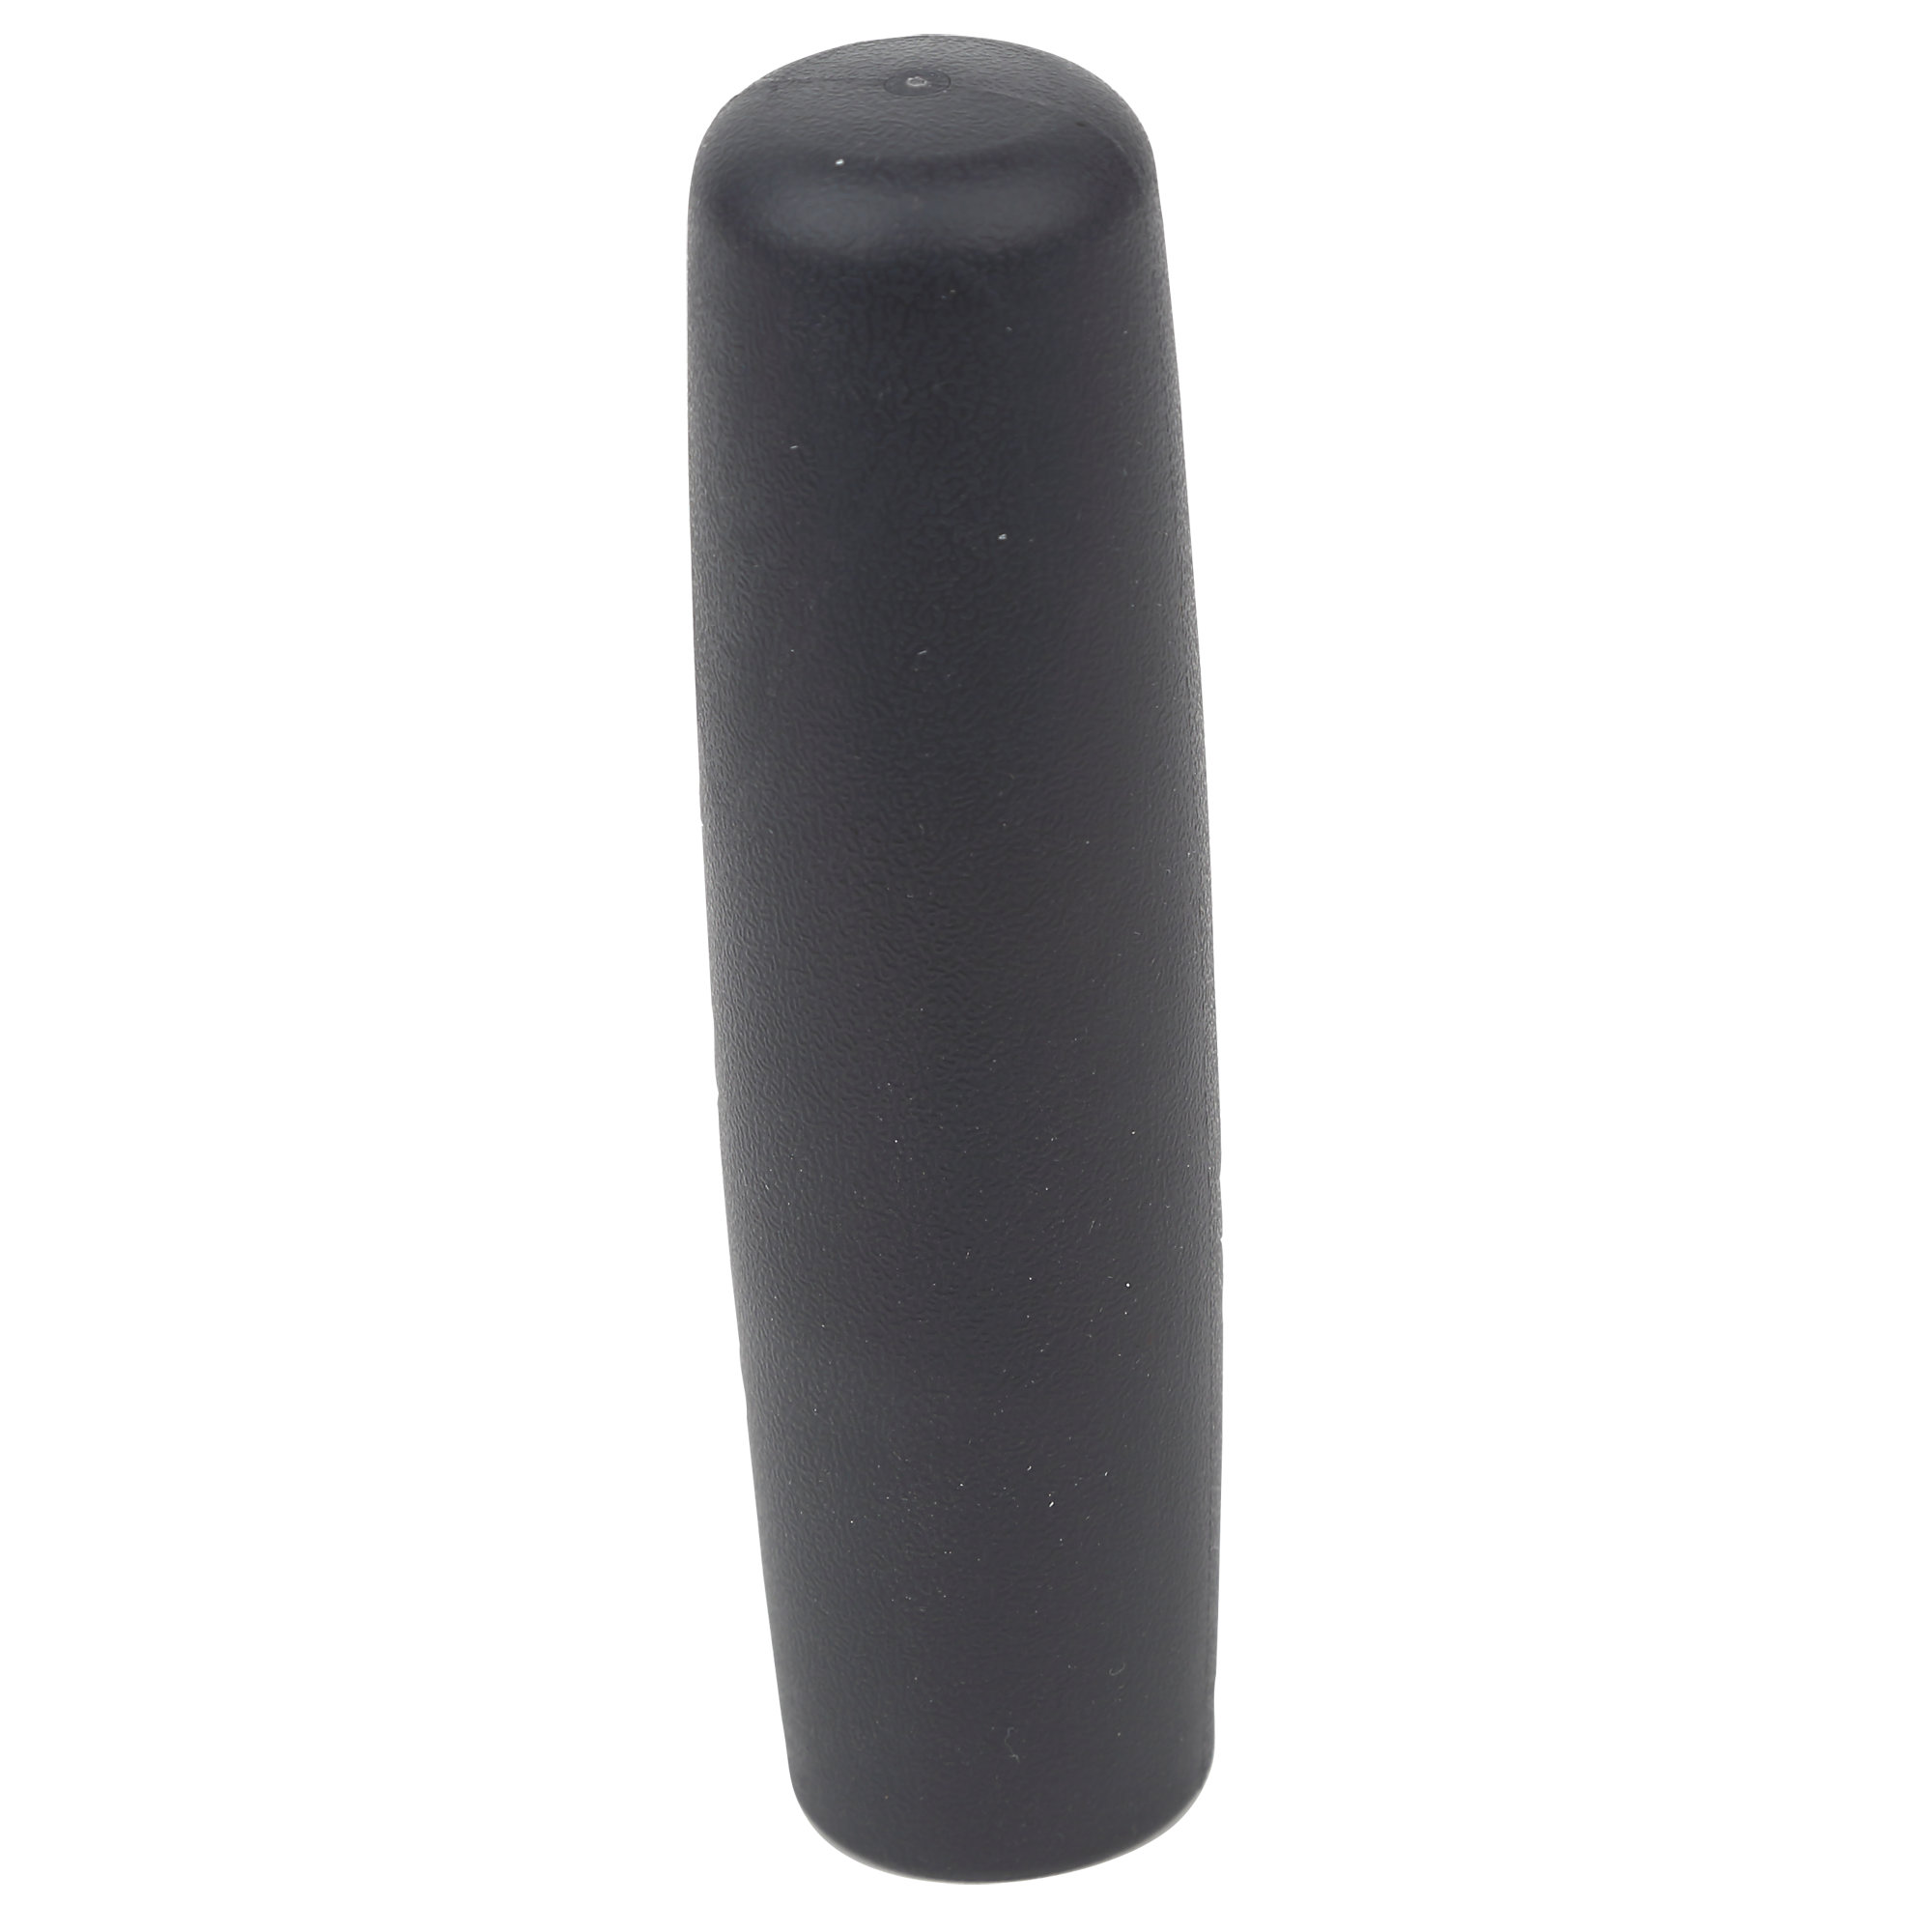 Stationary Handle Grips